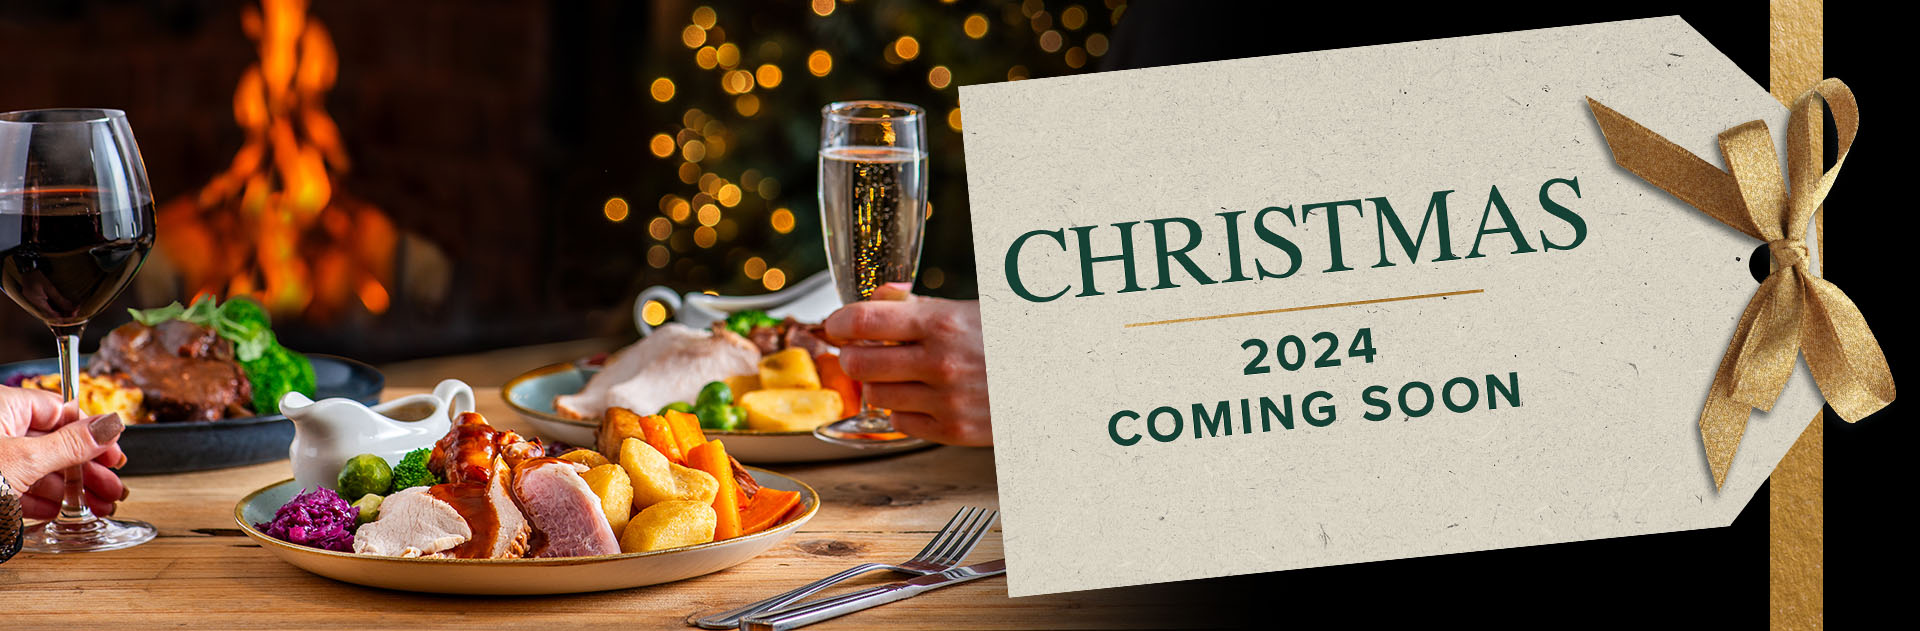 Christmas at White Lion, Warlingham 